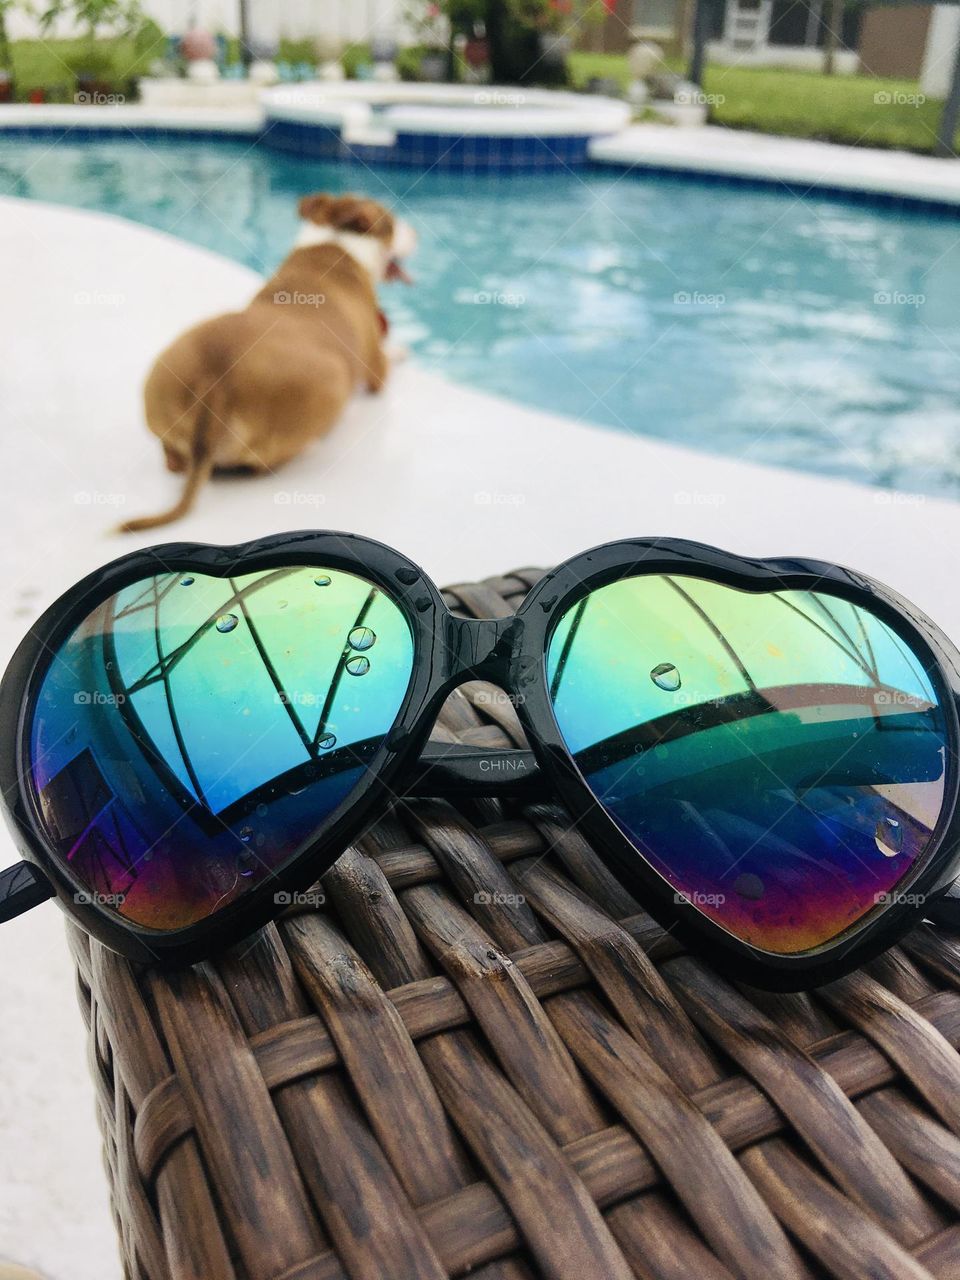 Heart sunglasses by the pool with a dog 🐶